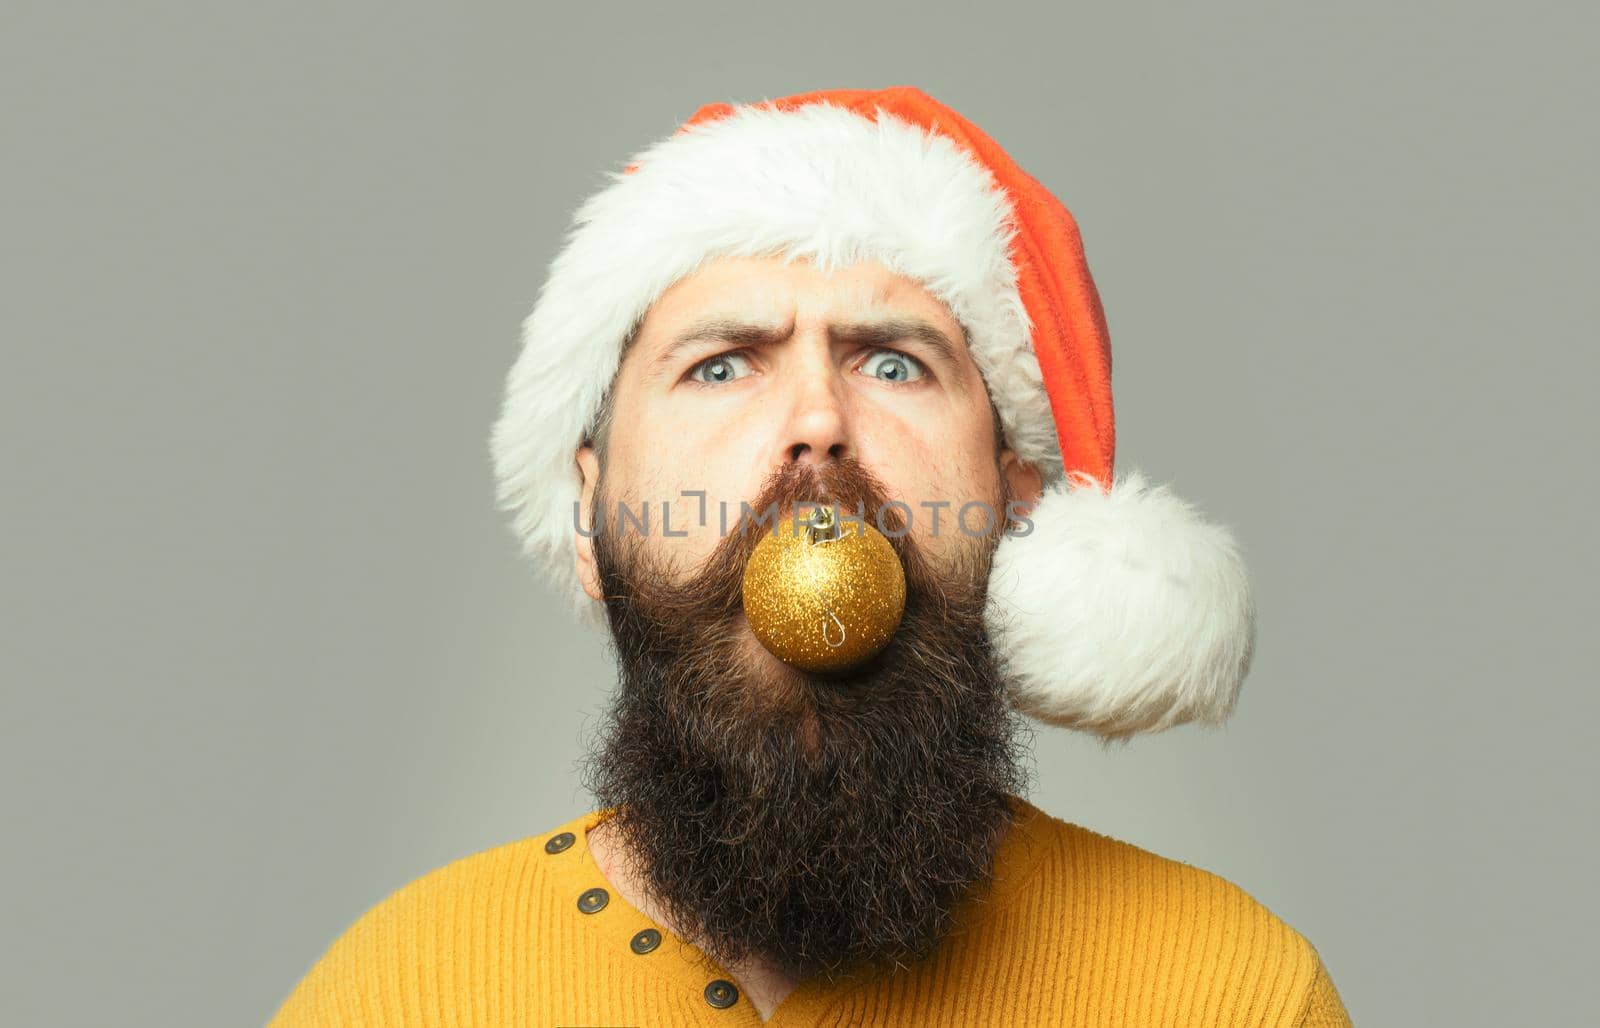 Crazy man with long beard and moustache on serious face with Christmas ball in mouth on grey background. Closeup funny face portrait by Tverdokhlib